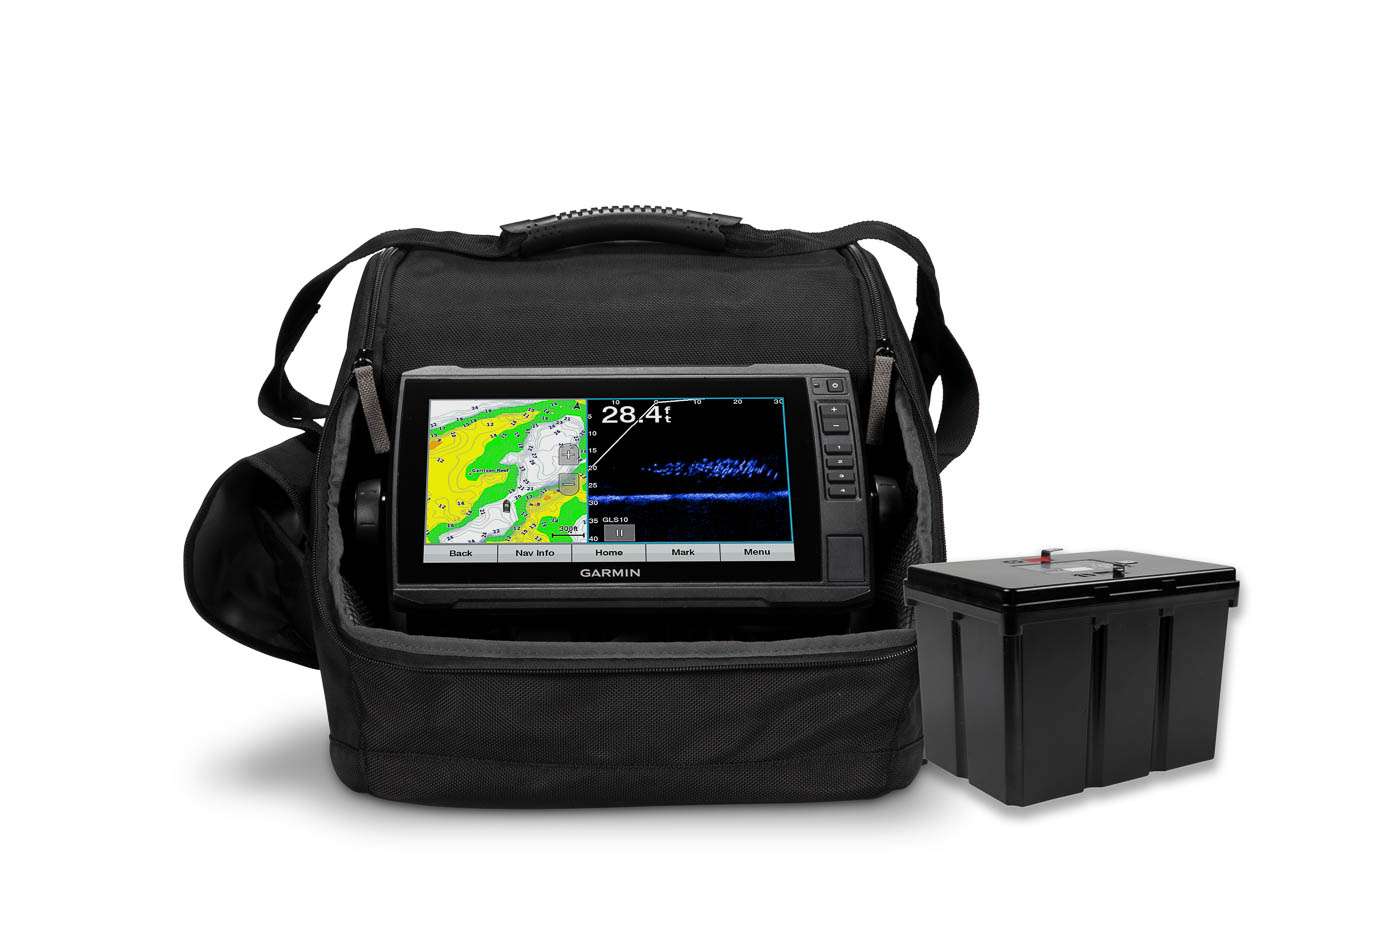 <p><strong>Garmin LiveScope Ice Fishing Bundle LI</strong></p><p>Drill fewer holes and catch more fish with Garminâs new LiveScope Ice Fishing Bundle LI with lithium-ion battery. Revolutionary Panoptix LiveScope sonar with LiveScope Forward and LiveScope Down modes pairs with a large ECHOMAP UHD 93sv combo touchscreen display, with views up to 200' in any direction. A built-in flasher provides a view of jigs and fish as they swim into the beam. Create custom pages that combine the sonar, flasher and map on the display. Preloaded LakeVÃ¼ g3 maps with integrated Navionics data cover more than 18,000 lakes. The bundle includes the complete Panoptix LiveScope system with swivel pole mount for the Panoptix LiveScope transducer, plus a new lightweight lithium battery for easier mobility and enough battery life to fish all day. The new LiveScope Ice Fishing Bundle LI includes a li-ion battery charger and utilizes a new power cable which stays flexible in the cold â all in a convenient, glove-friendly portable bag. $2,999.99. <a href=